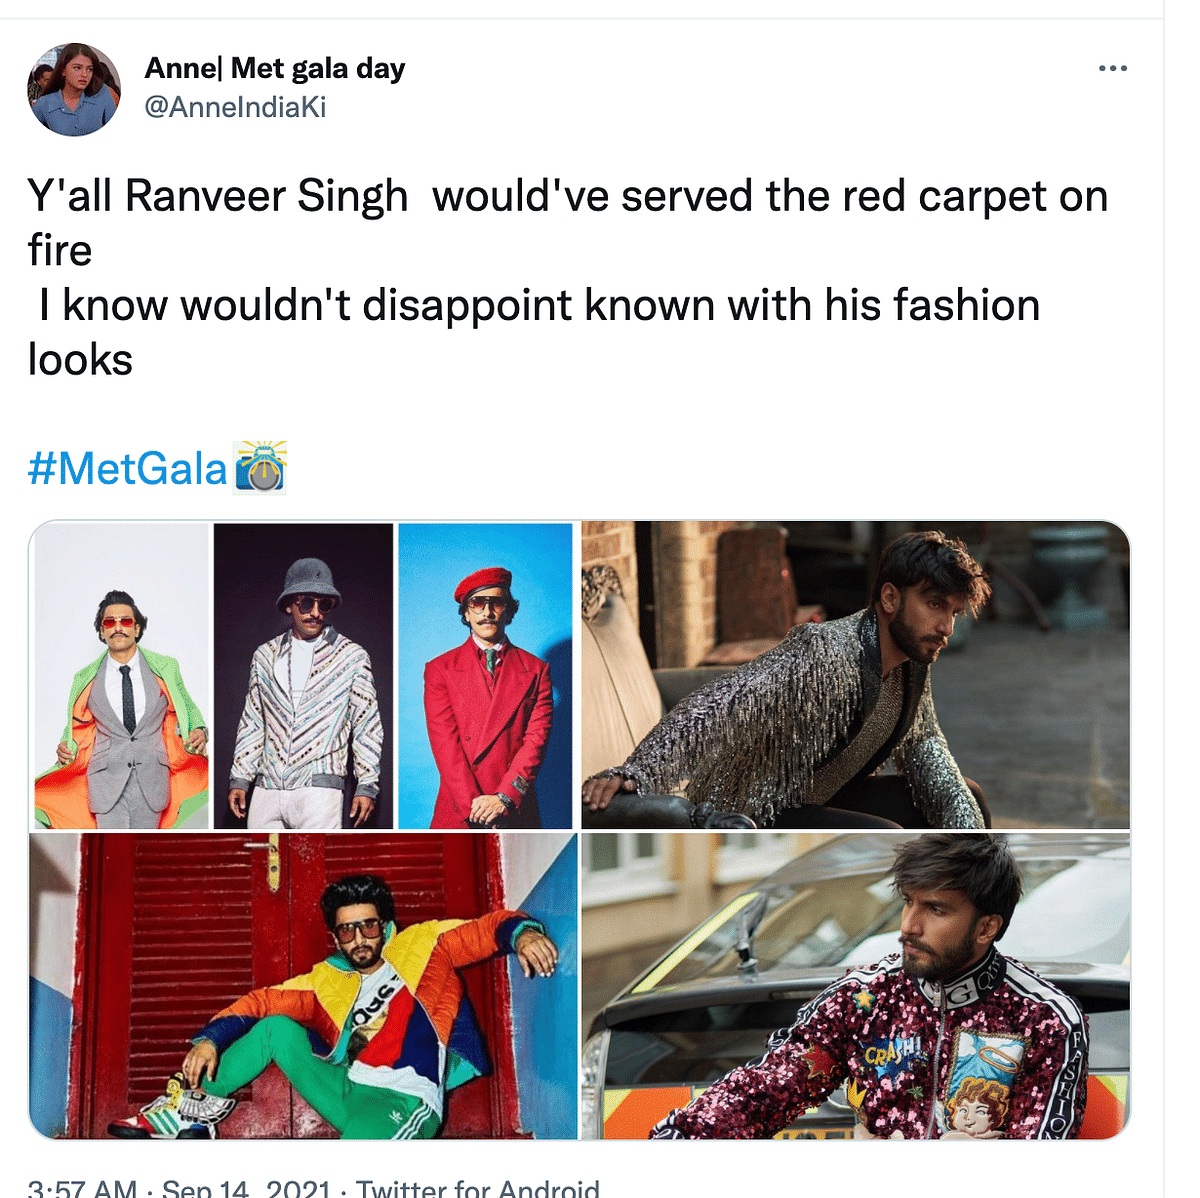 Desi Twitter demands Ranveer Singh be invited to Met Gala after photos from the red carpet surface.